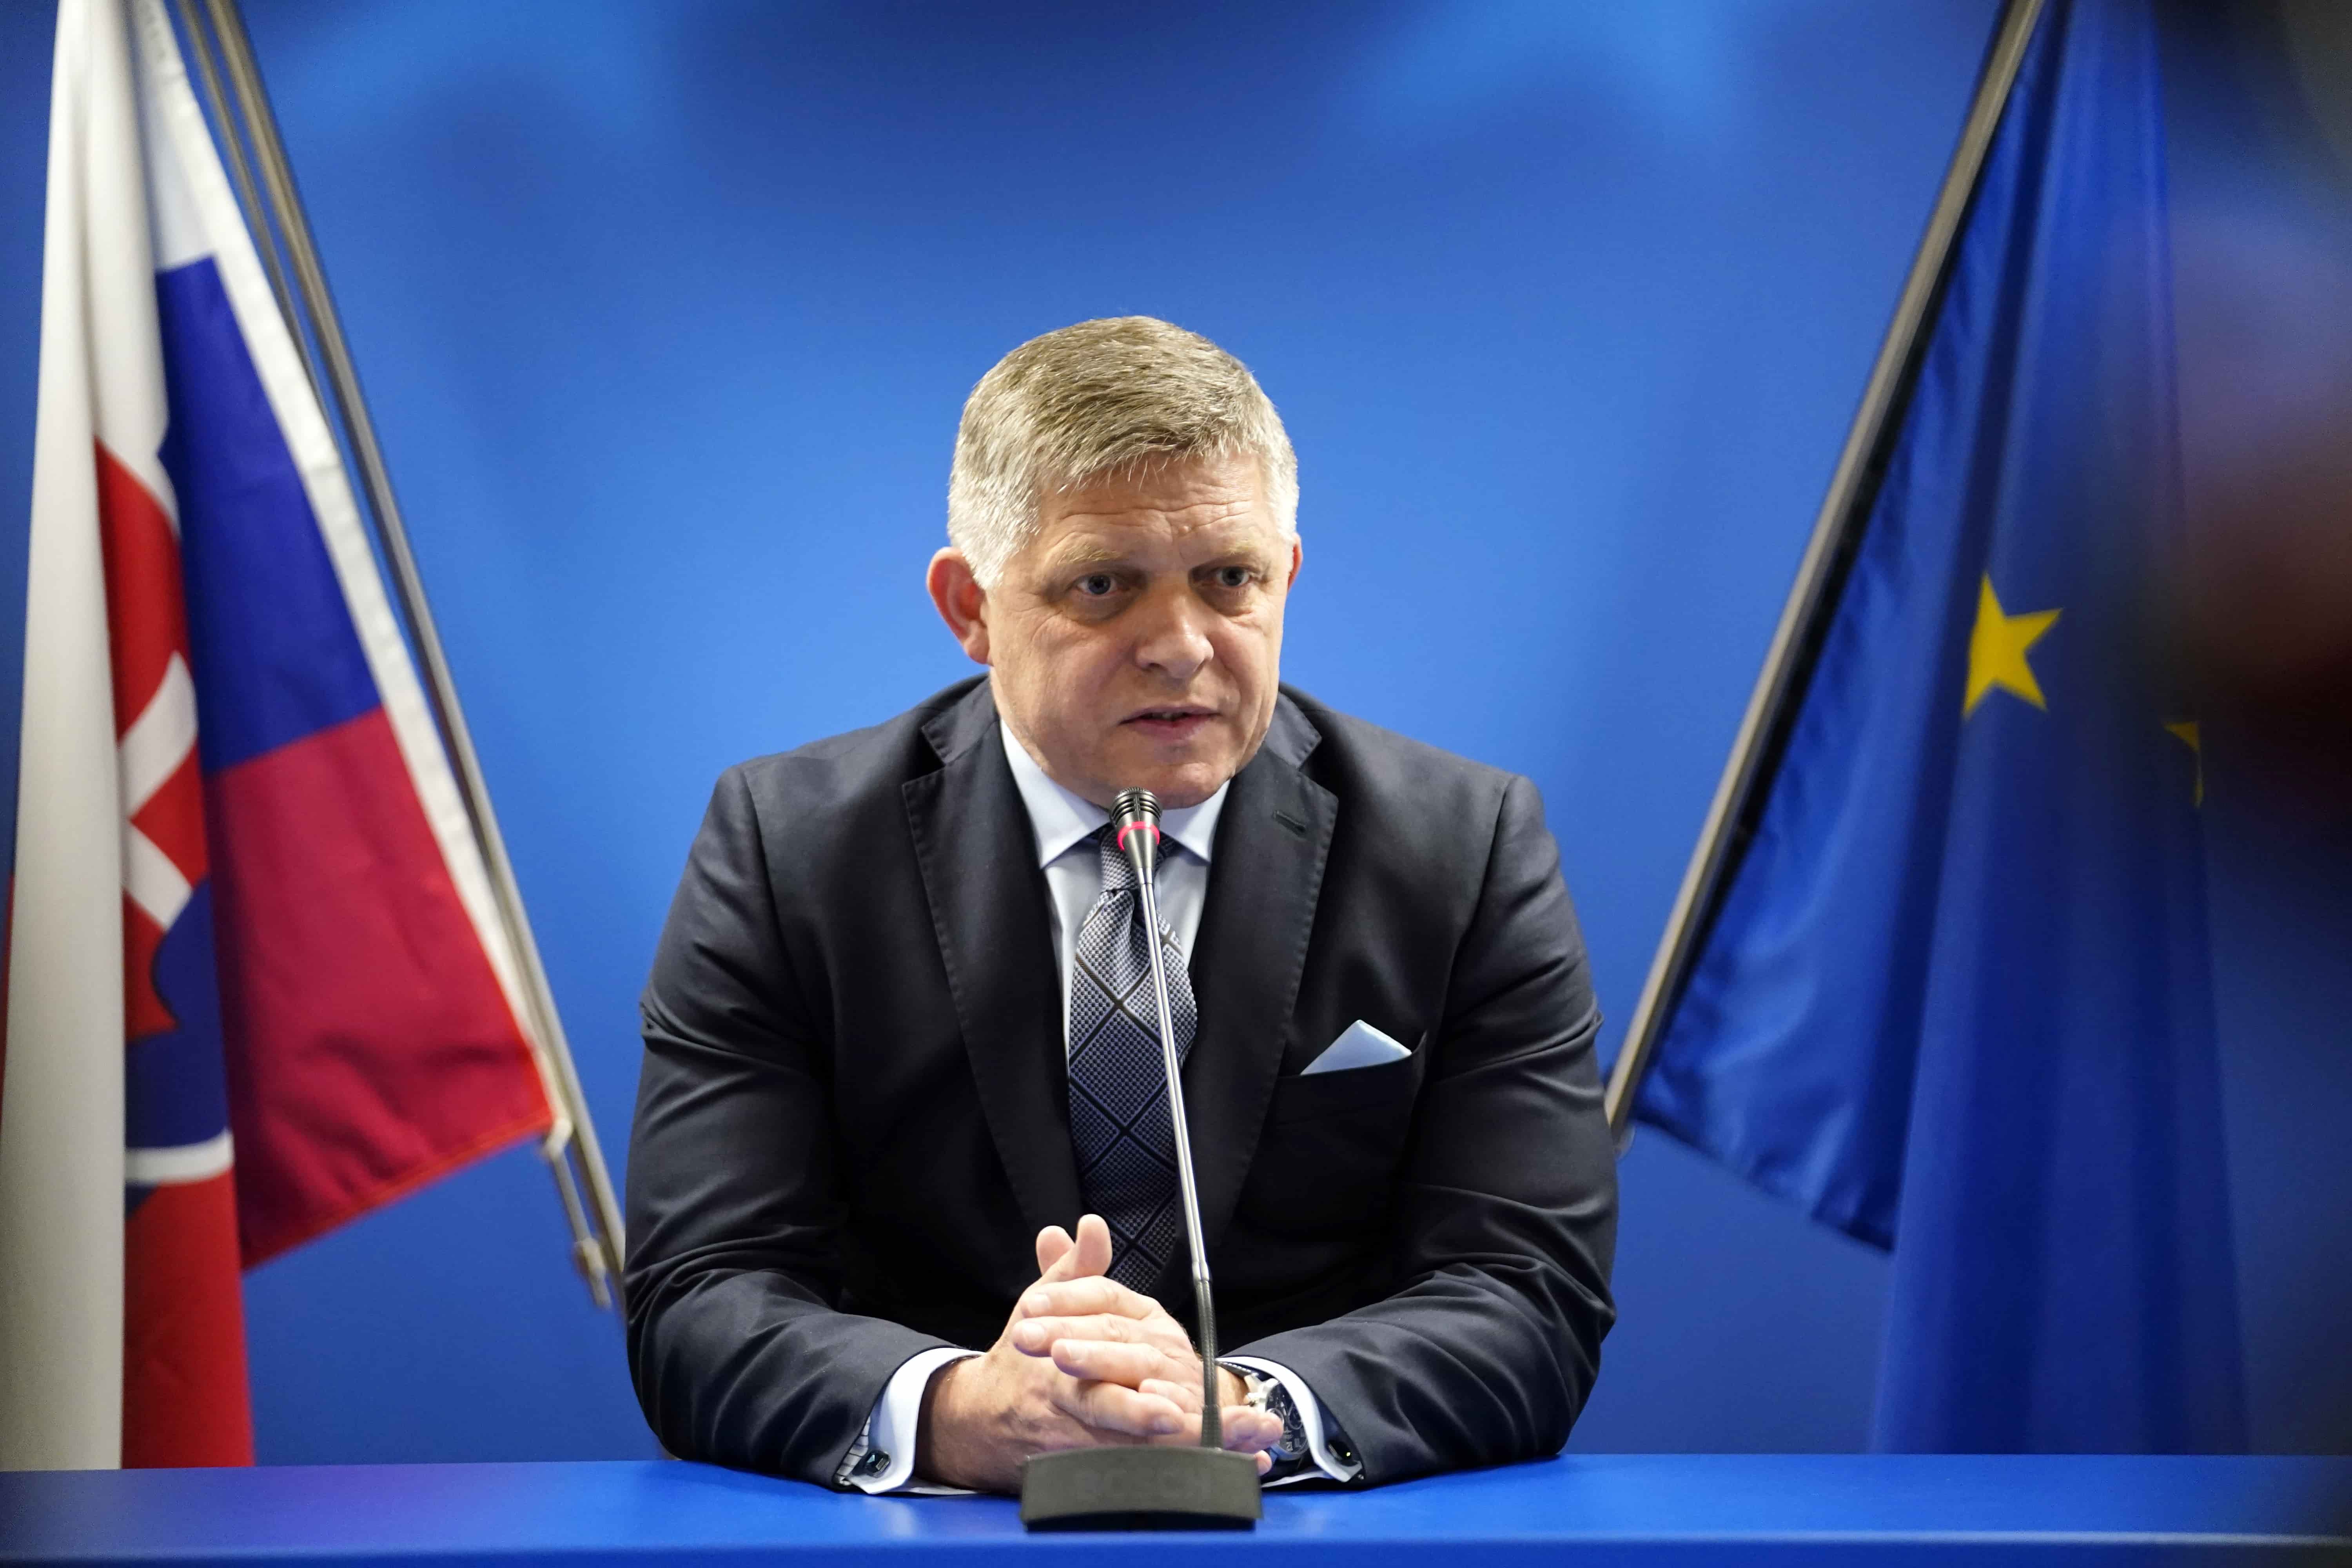 Slovakia to Replace Public Broadcaster With New Body